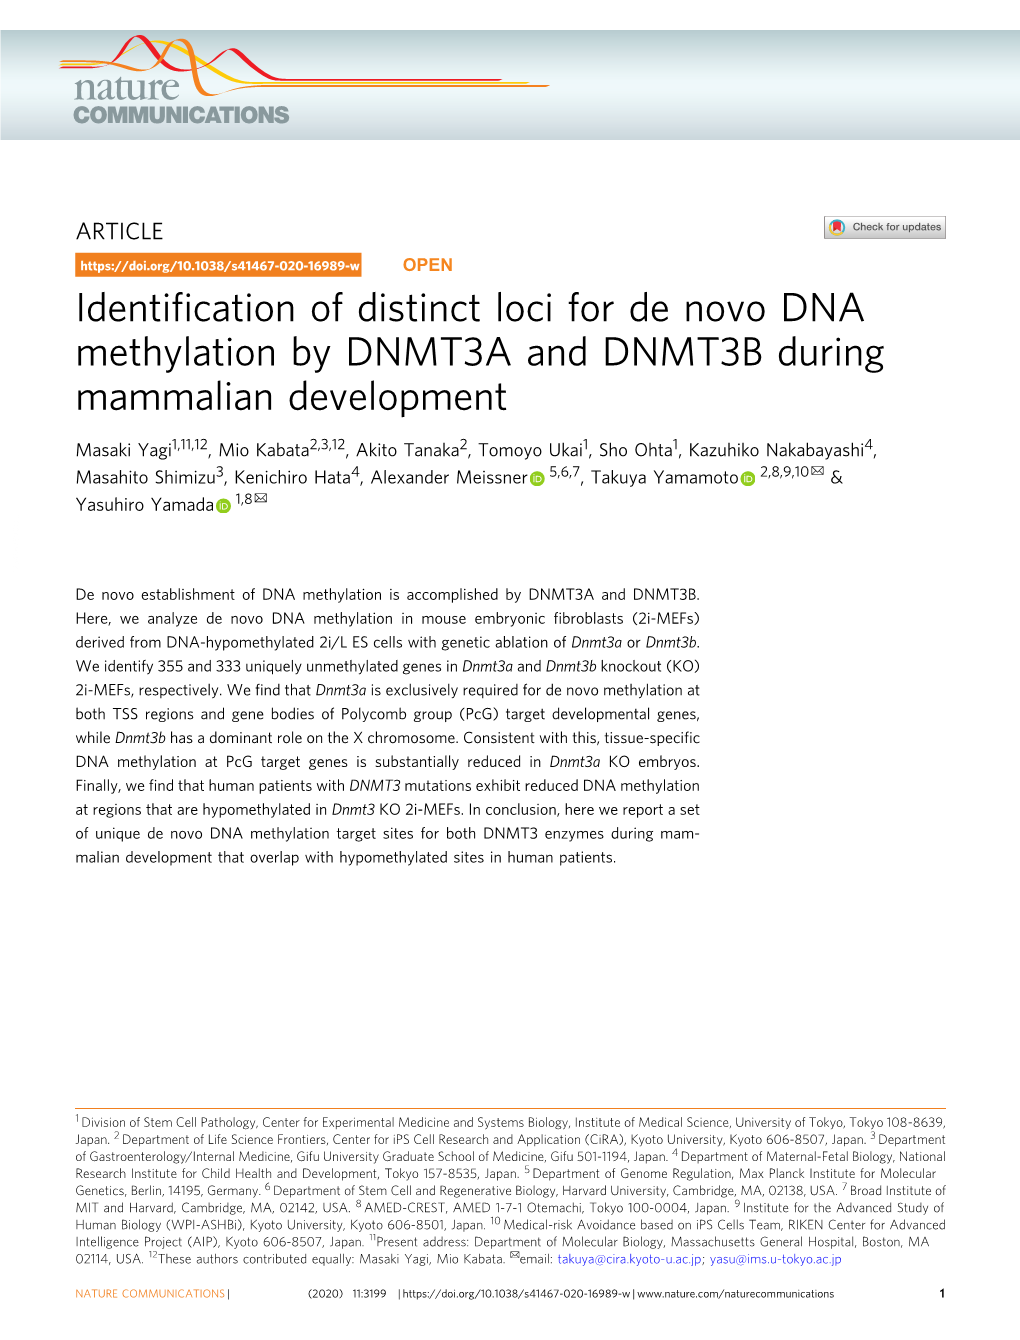 Identification of Distinct Loci for De Novo DNA Methylation by DNMT3A And